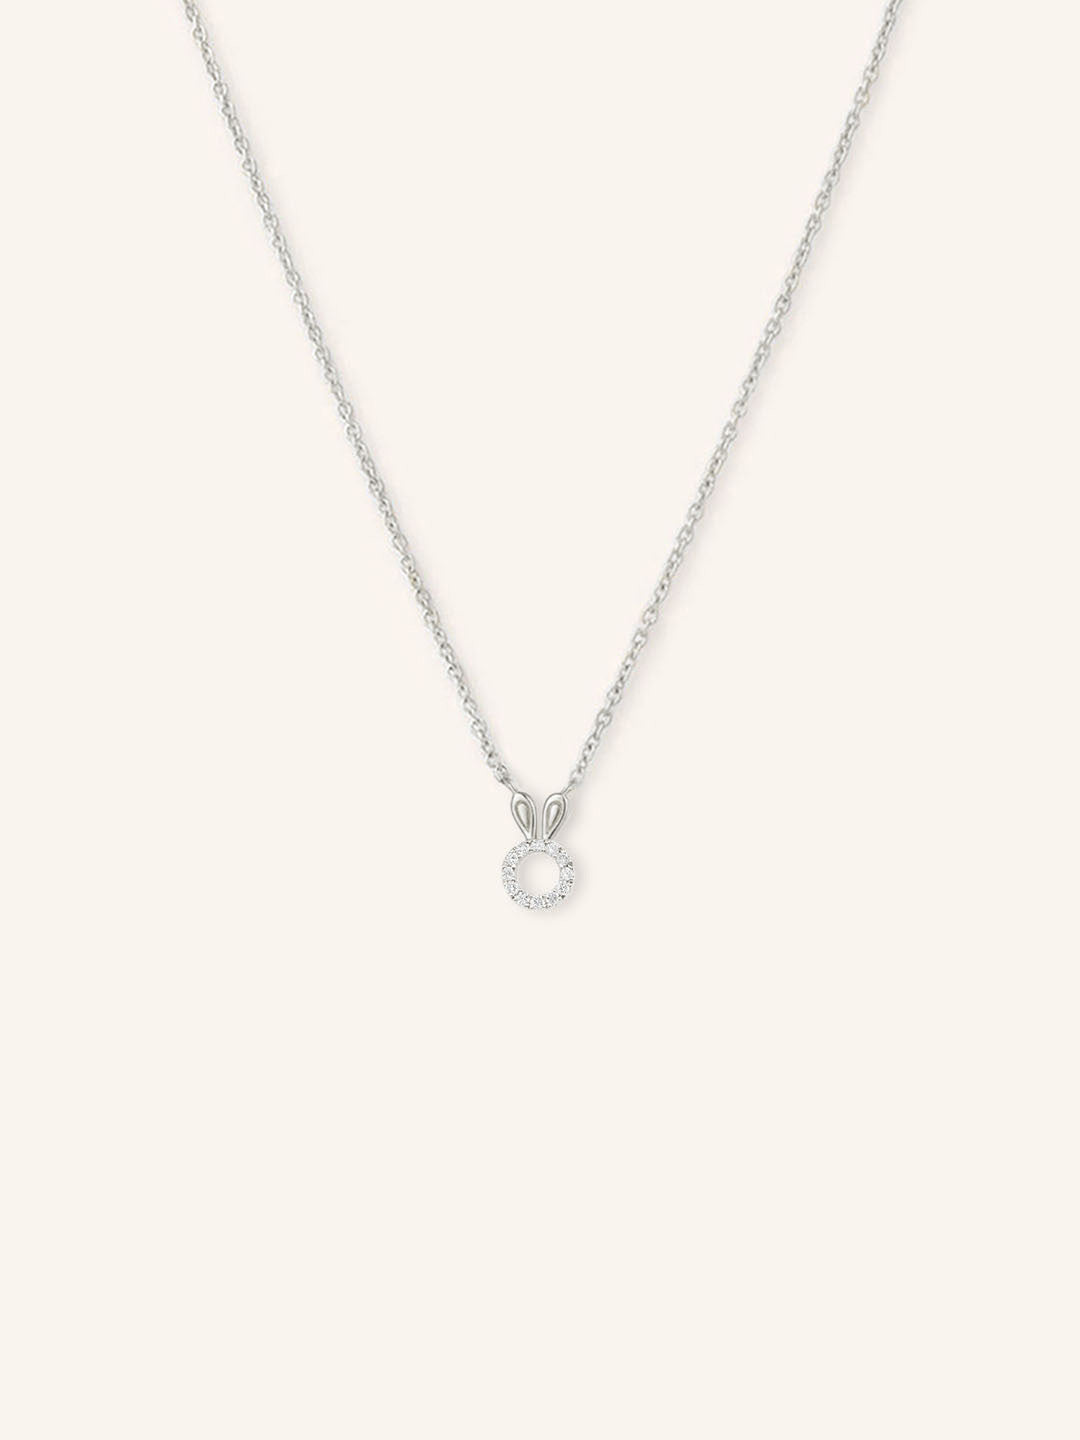 New Year New Fortune Rabbit Diamond Necklace